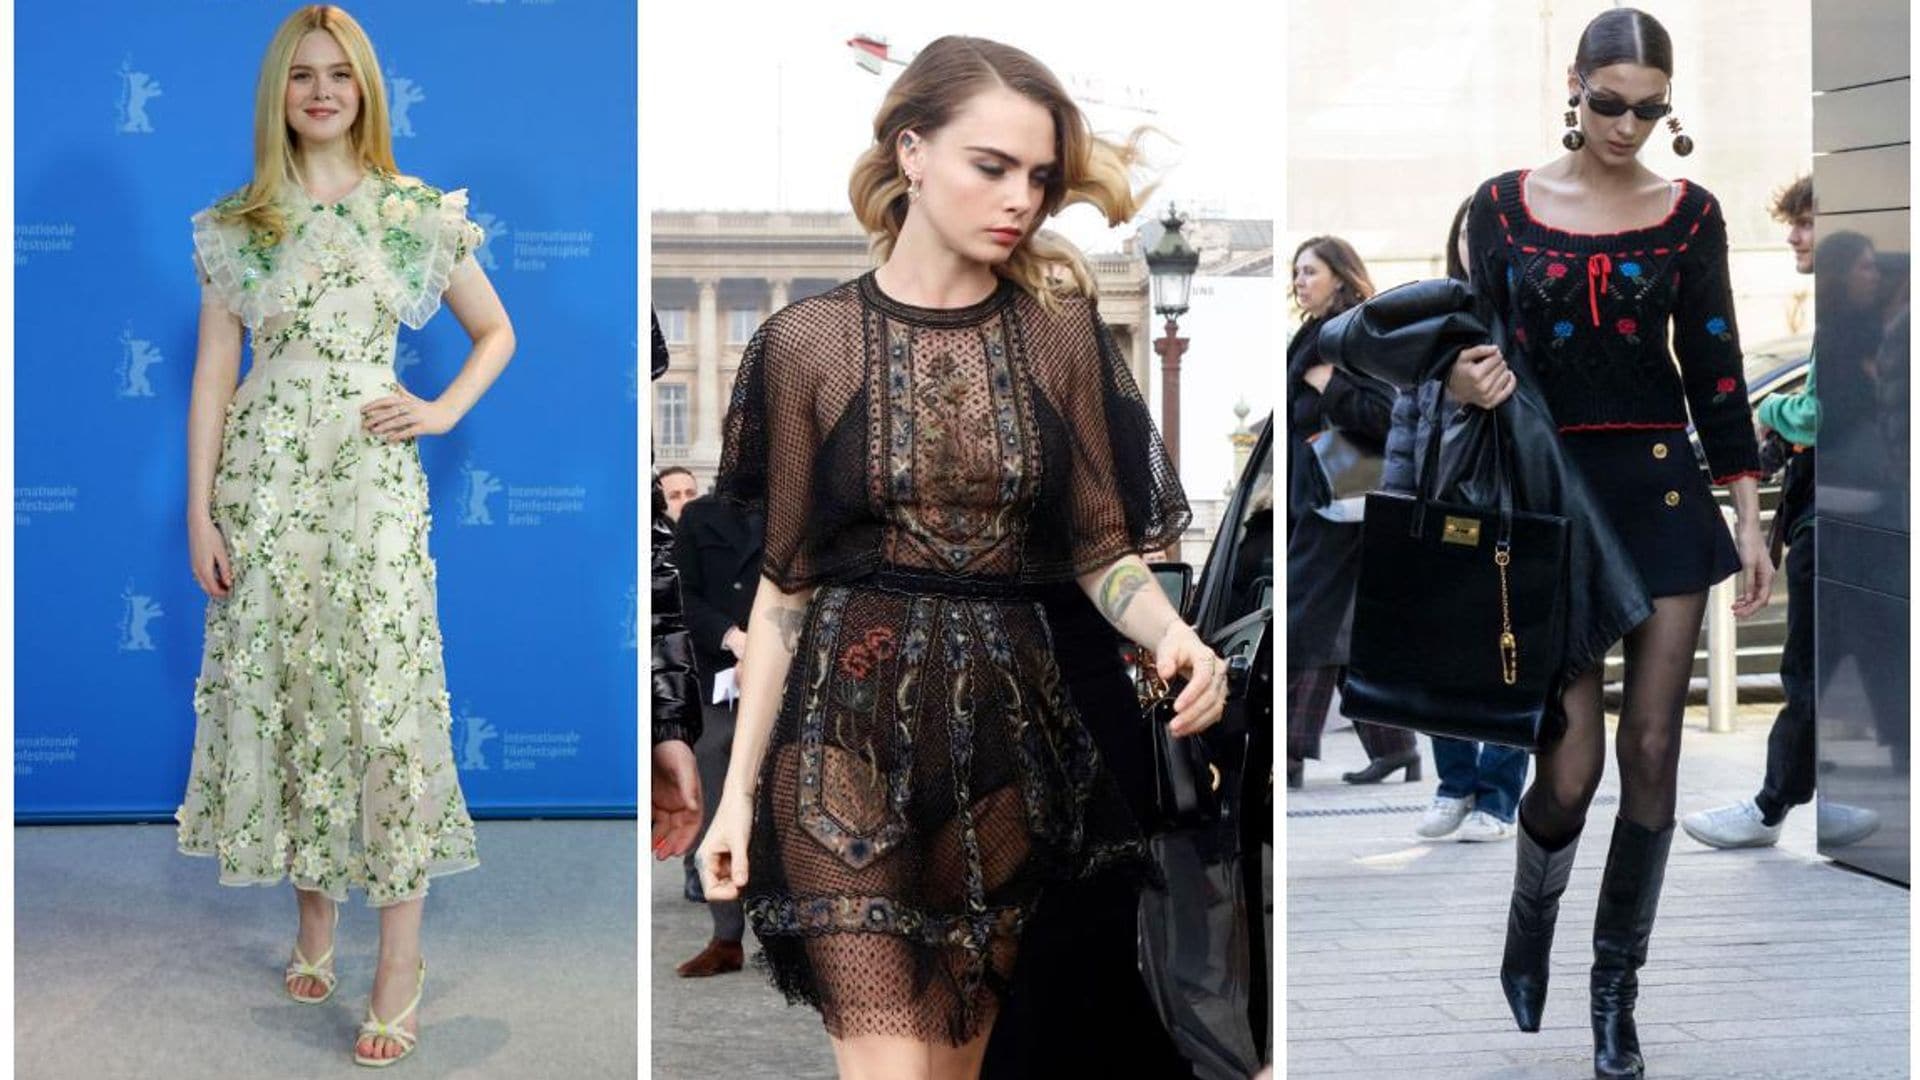 Elle Fanning, Cara Delevingne, and Bella Hadid in floral-print designs by Rodarte, Dior, and Versace, respectively